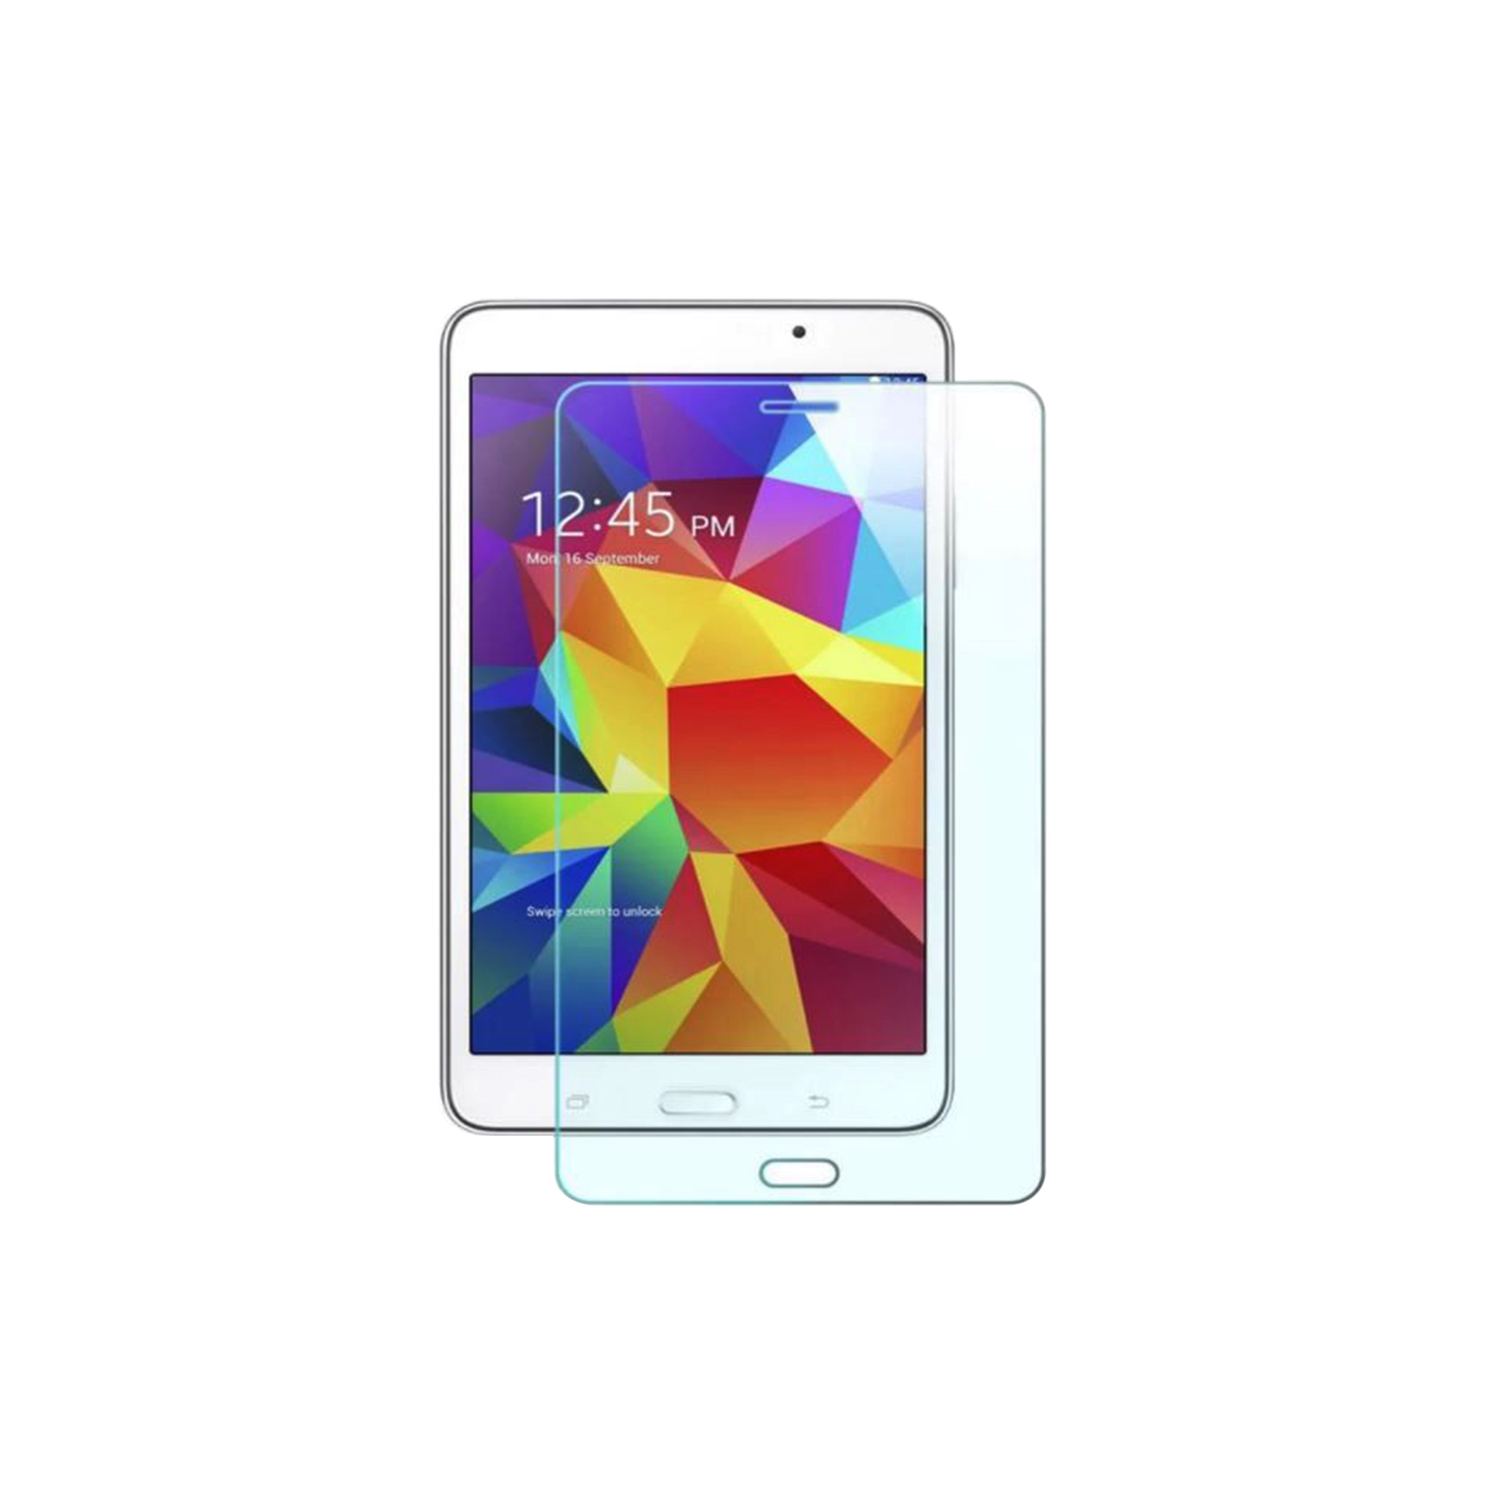 Tempered Glass Screen Protector for Samsung Galaxy Tab 3 Lite 7.0 SM-T110 Tablet - Clear